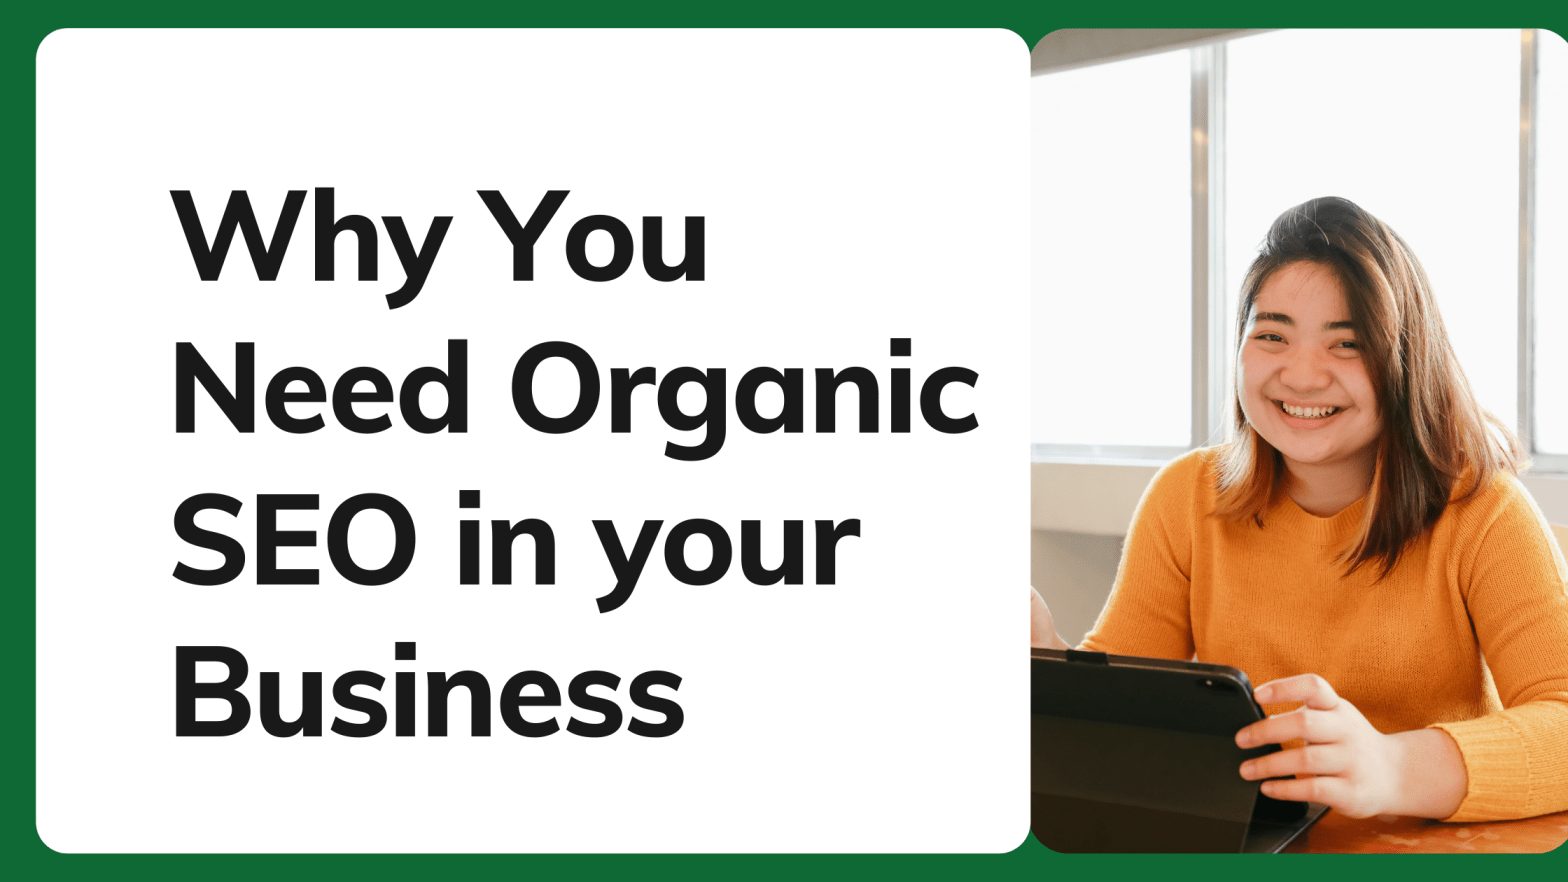 Why You Need Organic SEO in Your Business